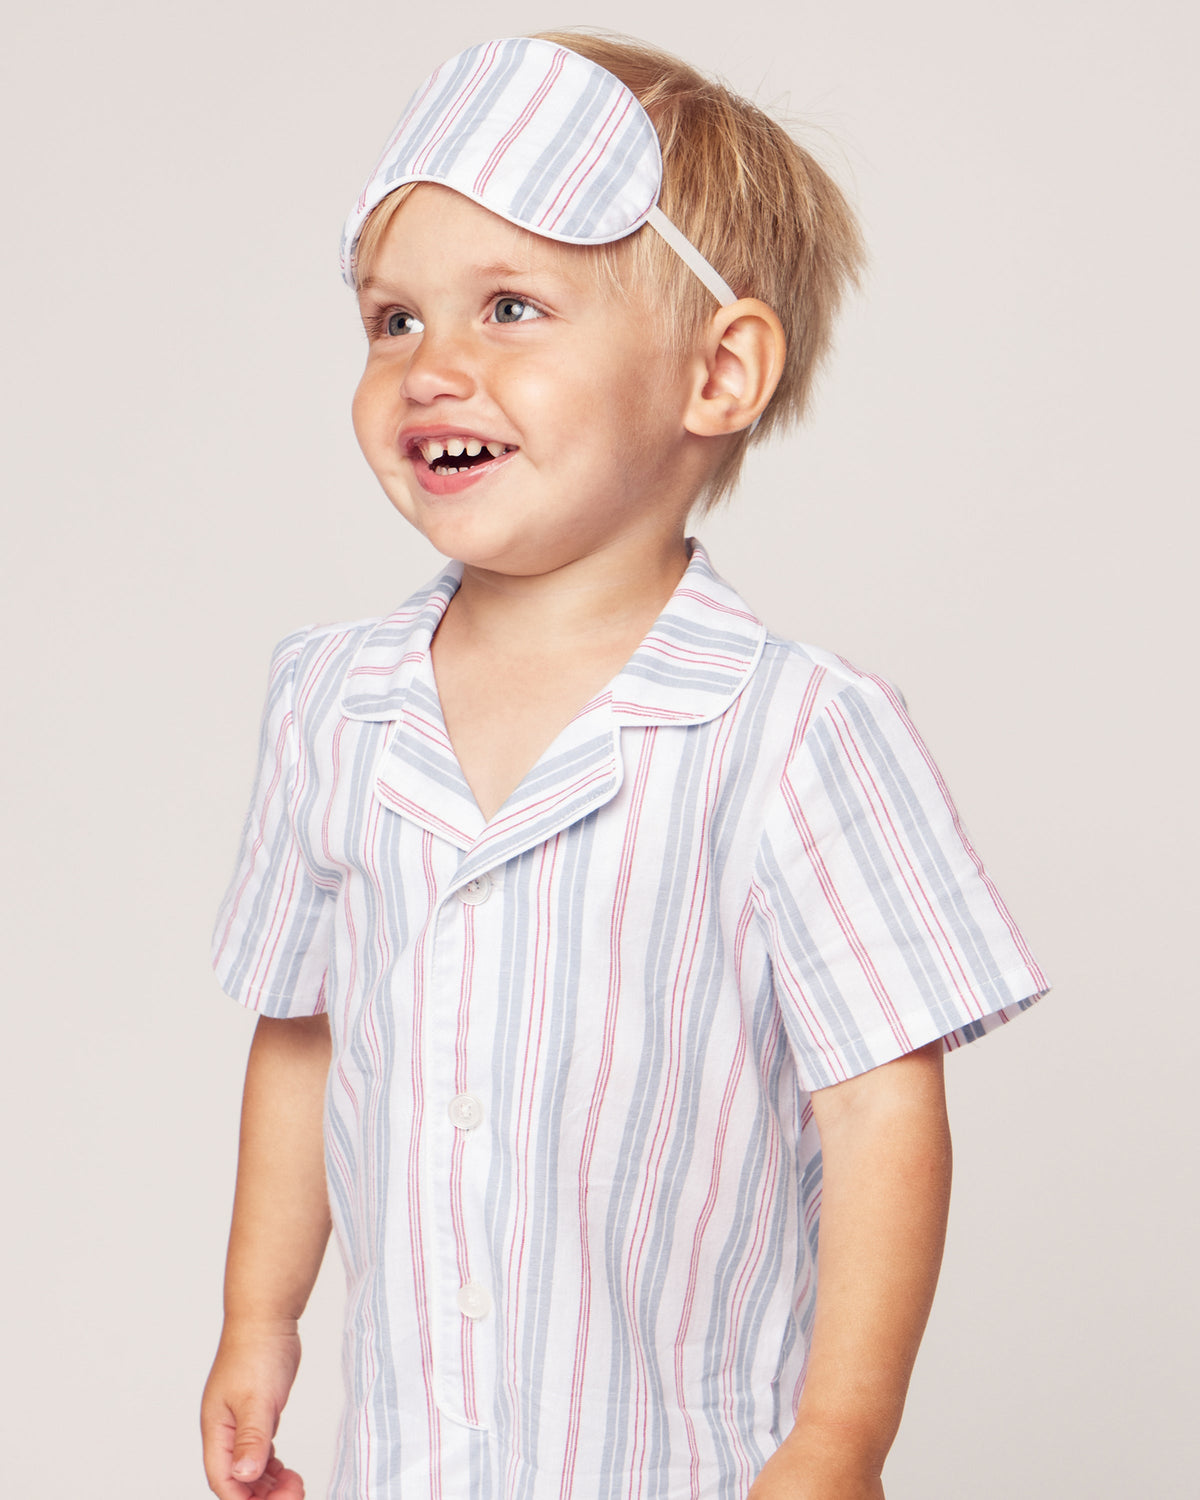 Baby's Twill Summer Romper in Vintage French Stripes